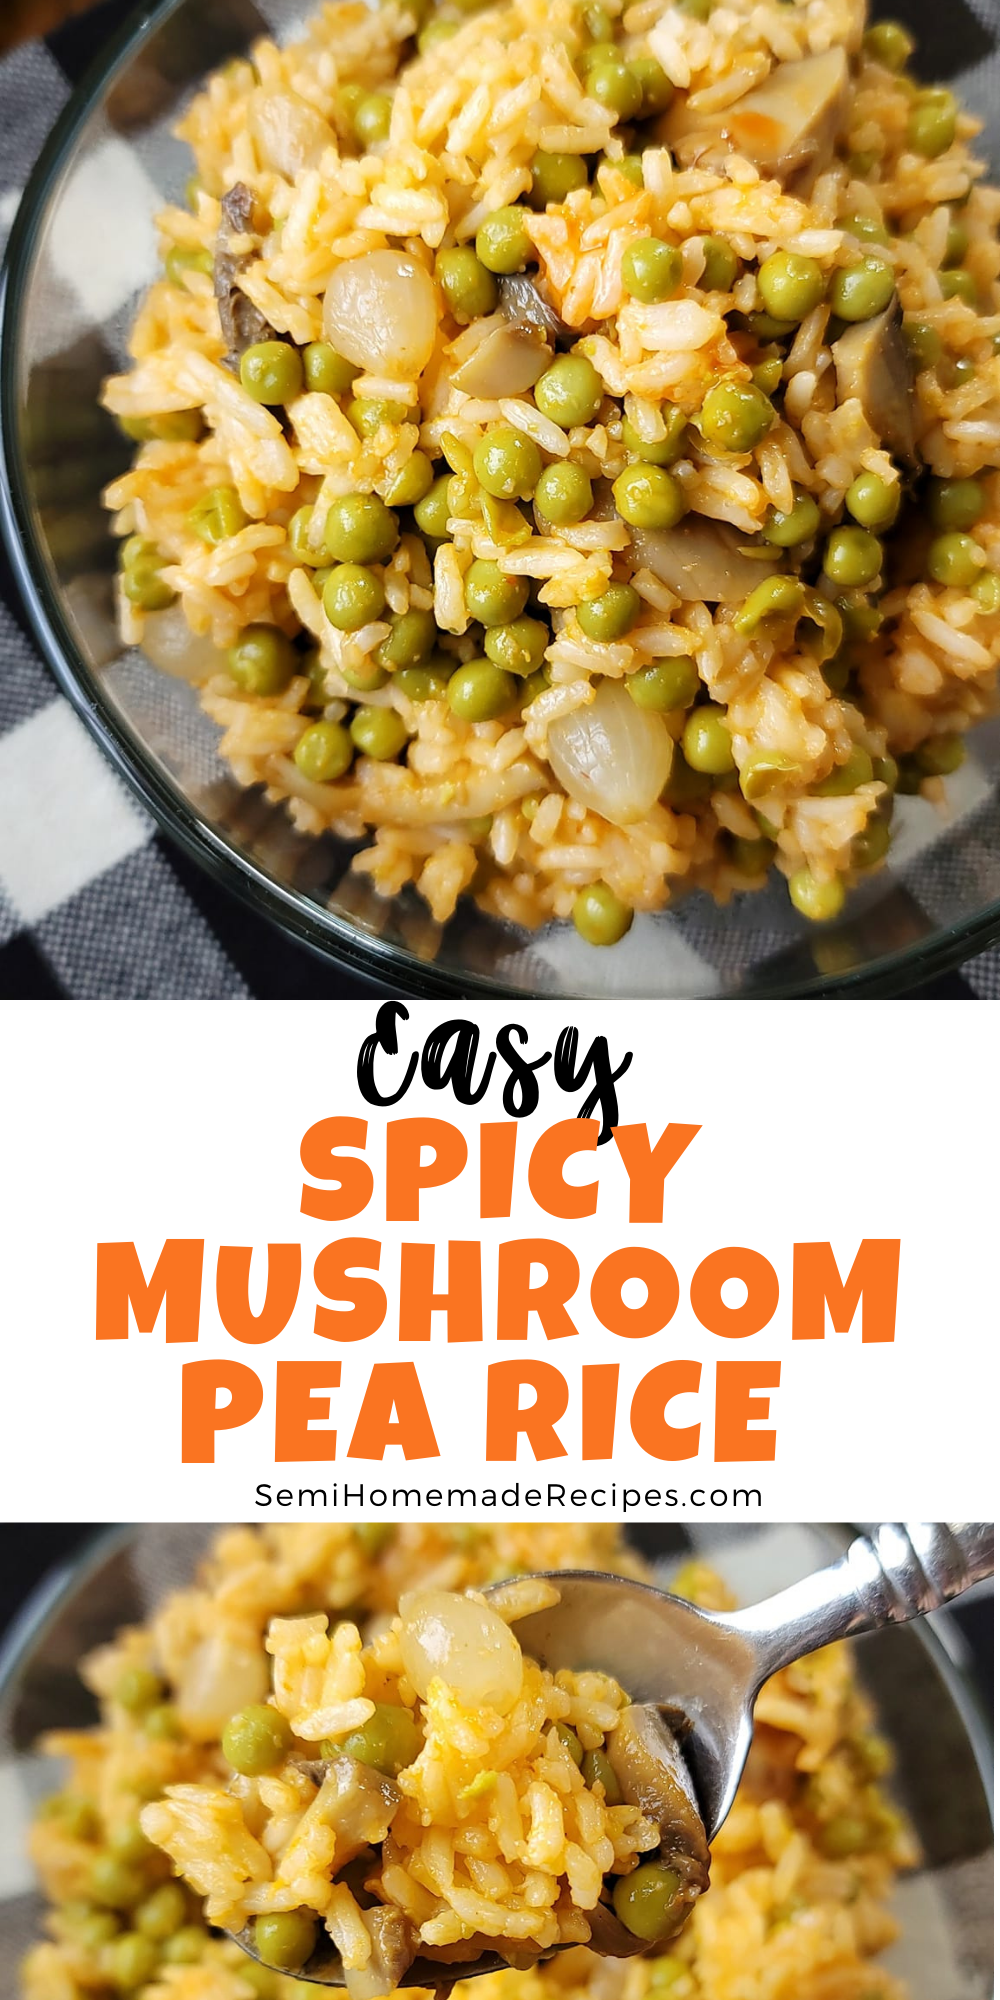 Made with Jasmine Rice, canned peas with mushrooms and pearl onions and Texas Pete! This Spicy Mushroom Pea Rice side dish is ready in less than 5 minutes.